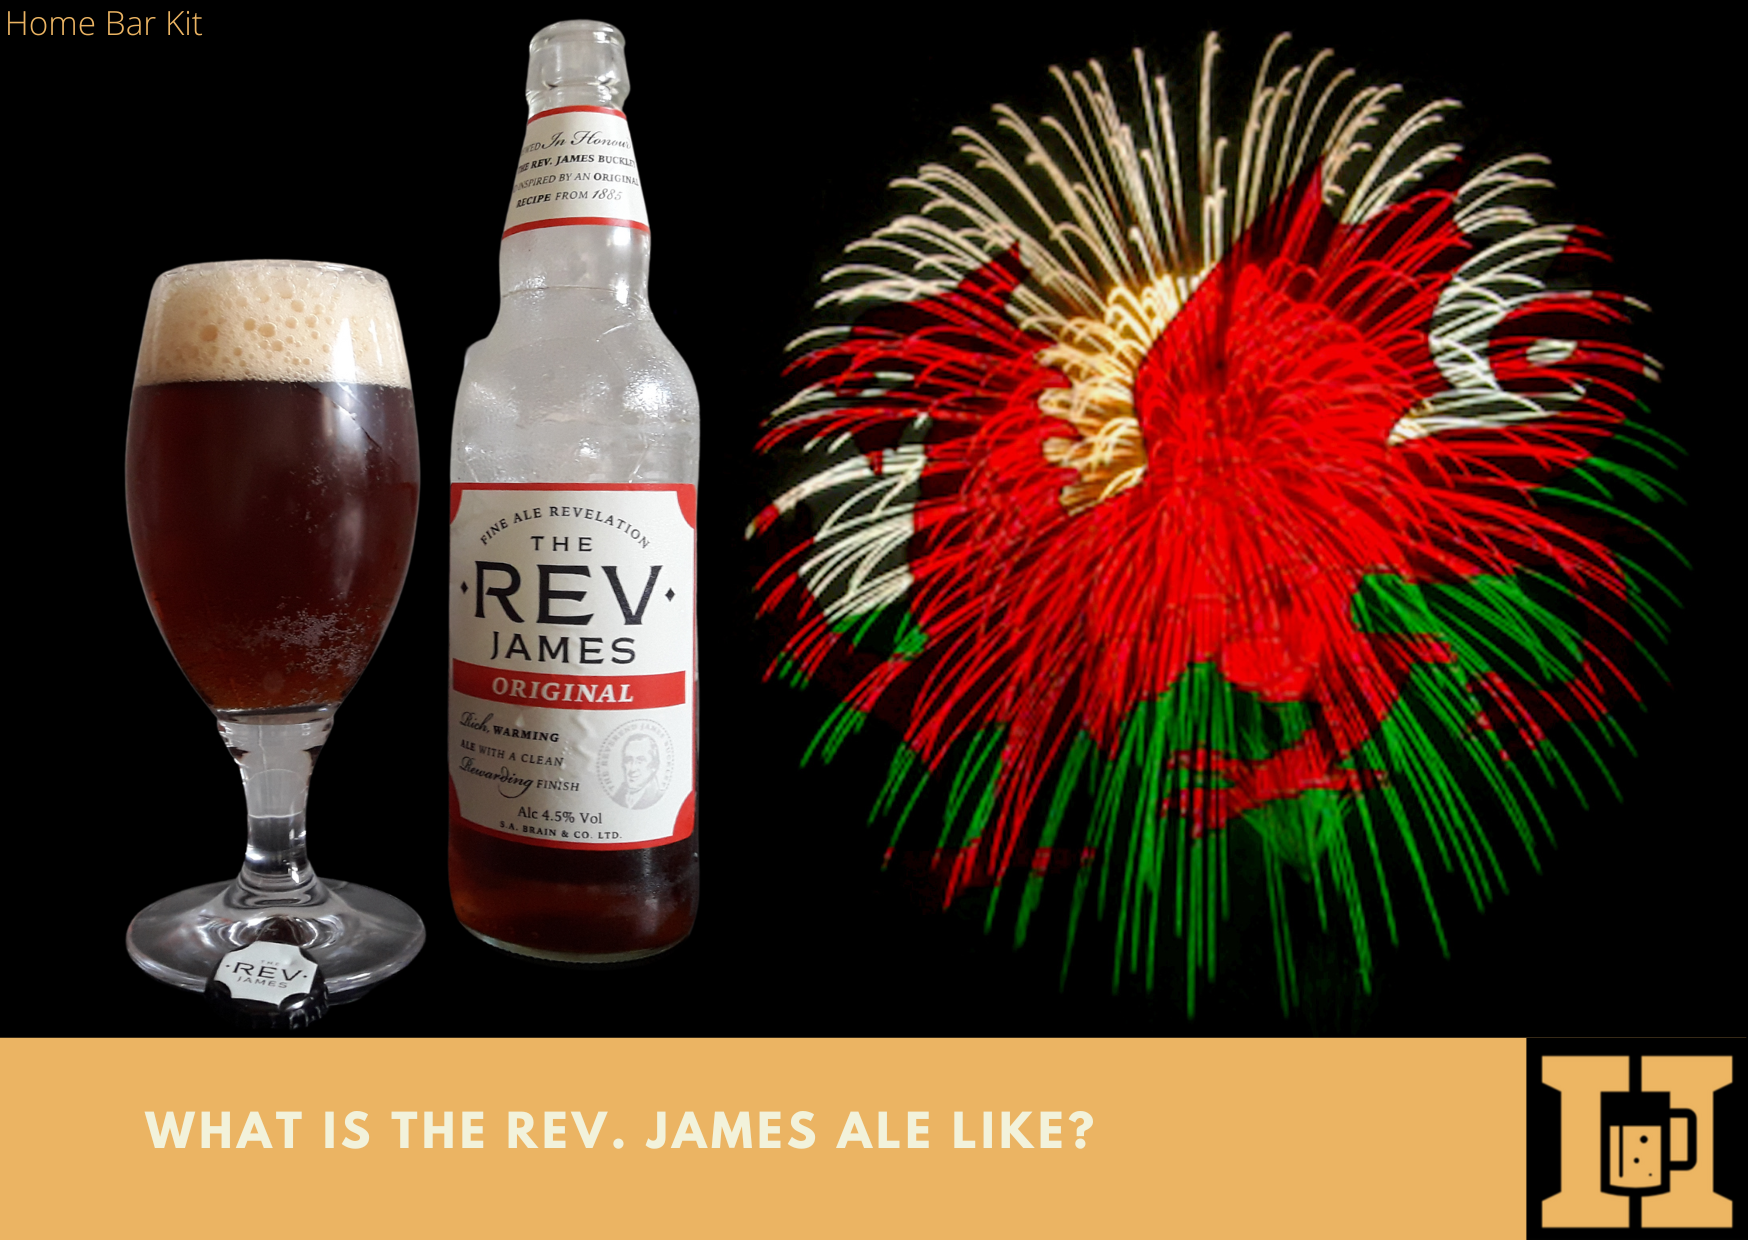 What Is The Rev. James Ale Like